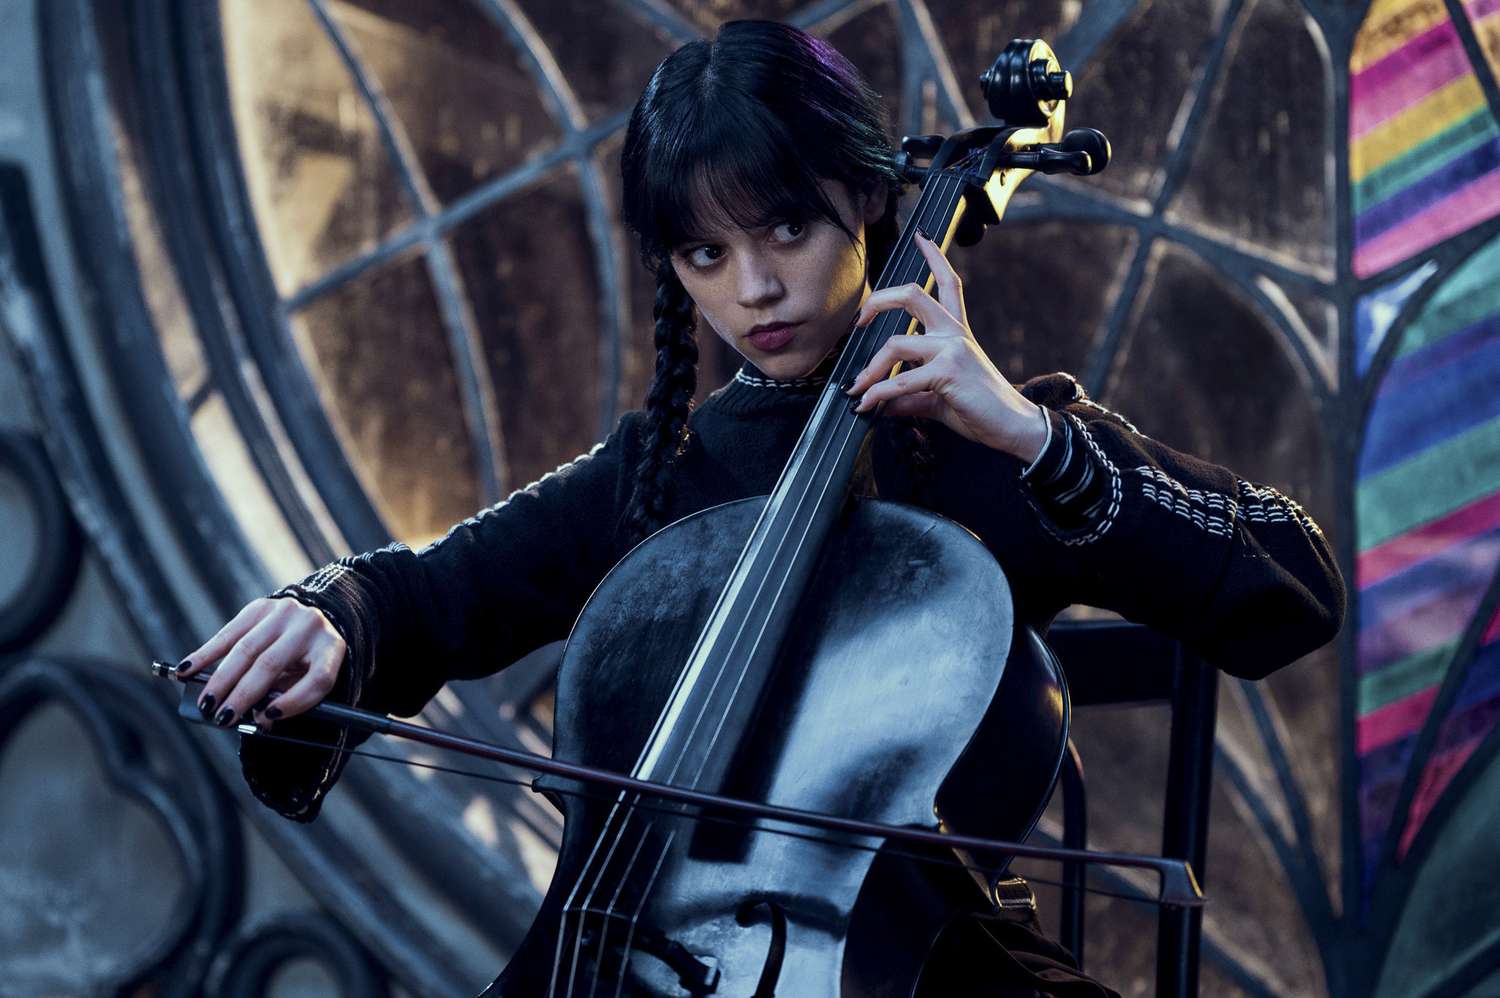 Is Wednesday Addams a Witch? Playing black cello in Netflix series